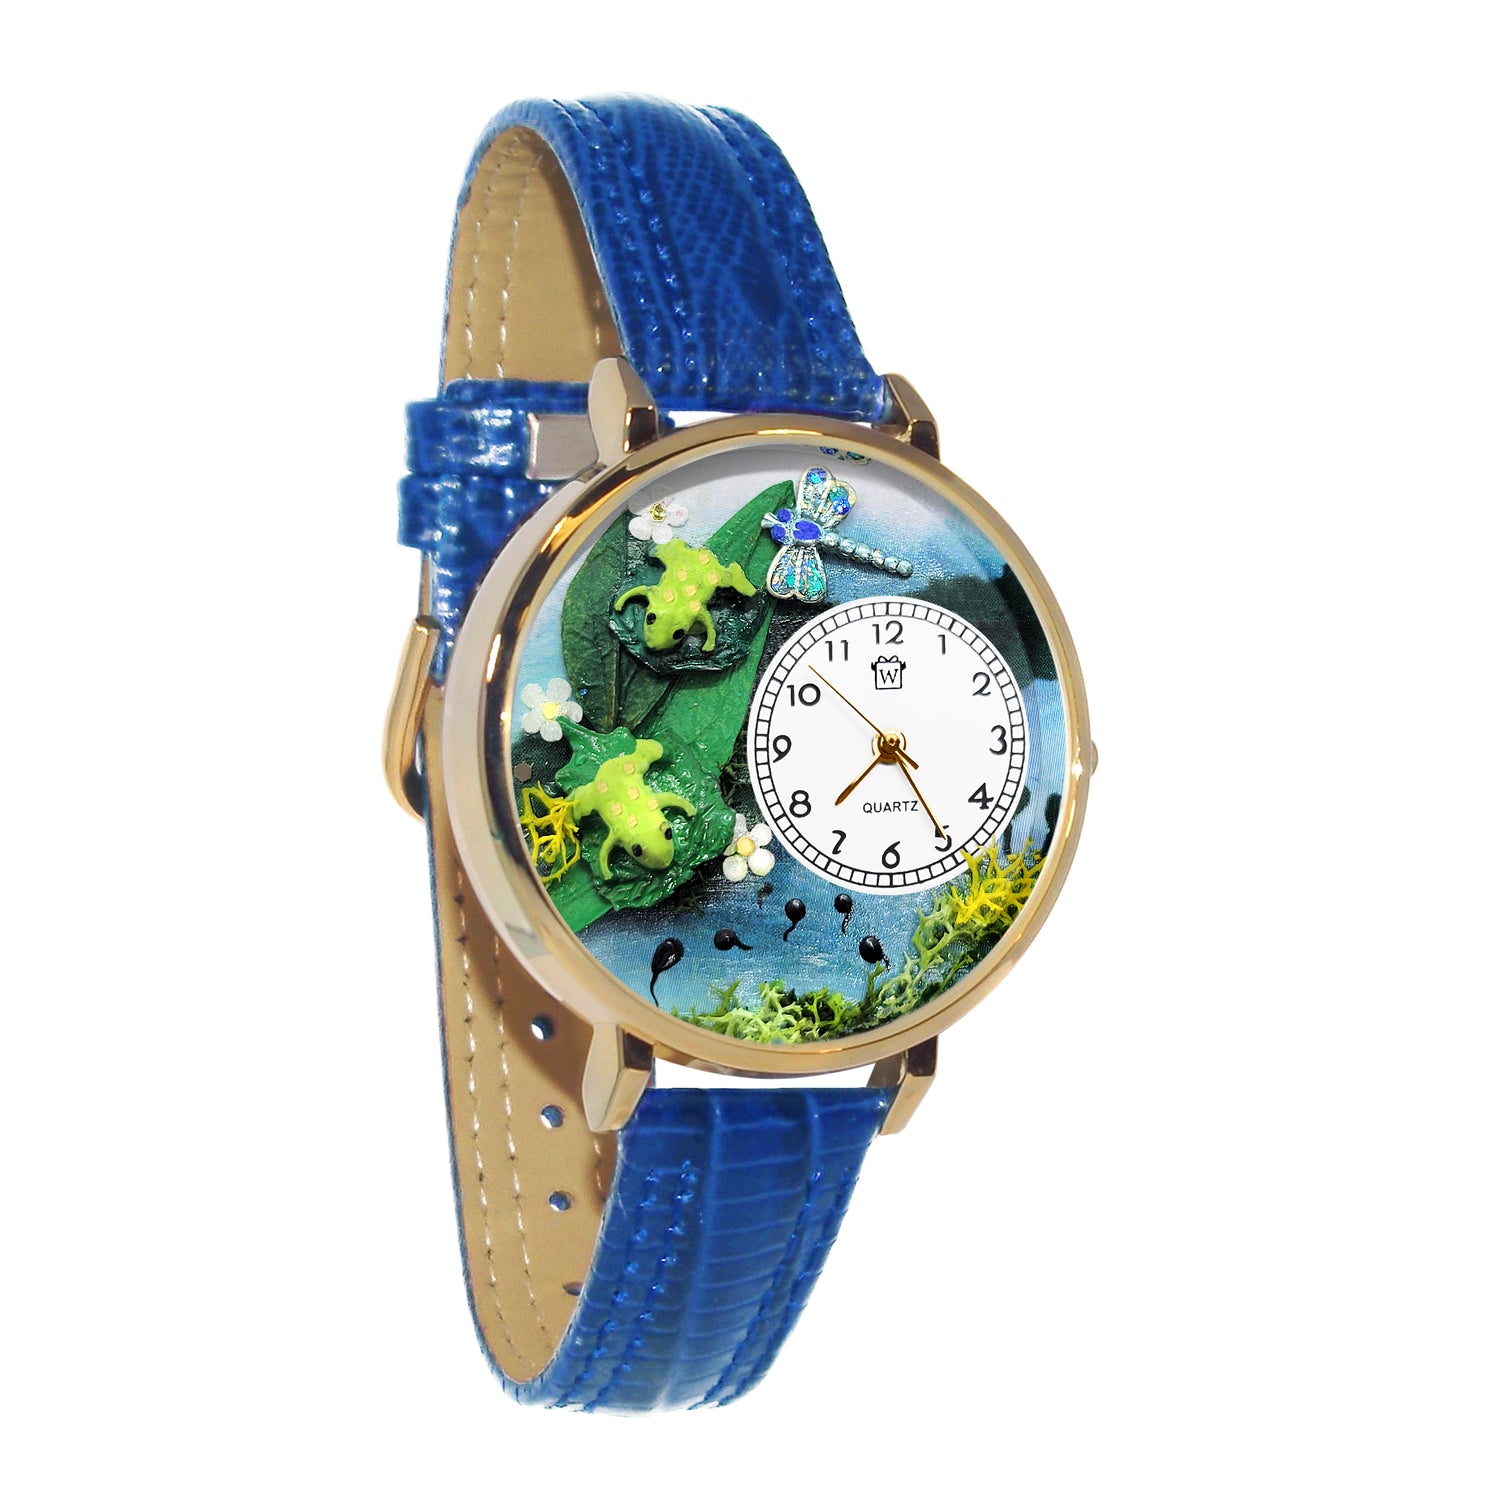 Whimsical Gifts | Frogs 3D Watch Large Style | Handmade in USA | Animal Lover | Outdoor & Garden | Novelty Unique Fun Miniatures Gift | Gold Finish Royal Blue Leather Watch Band